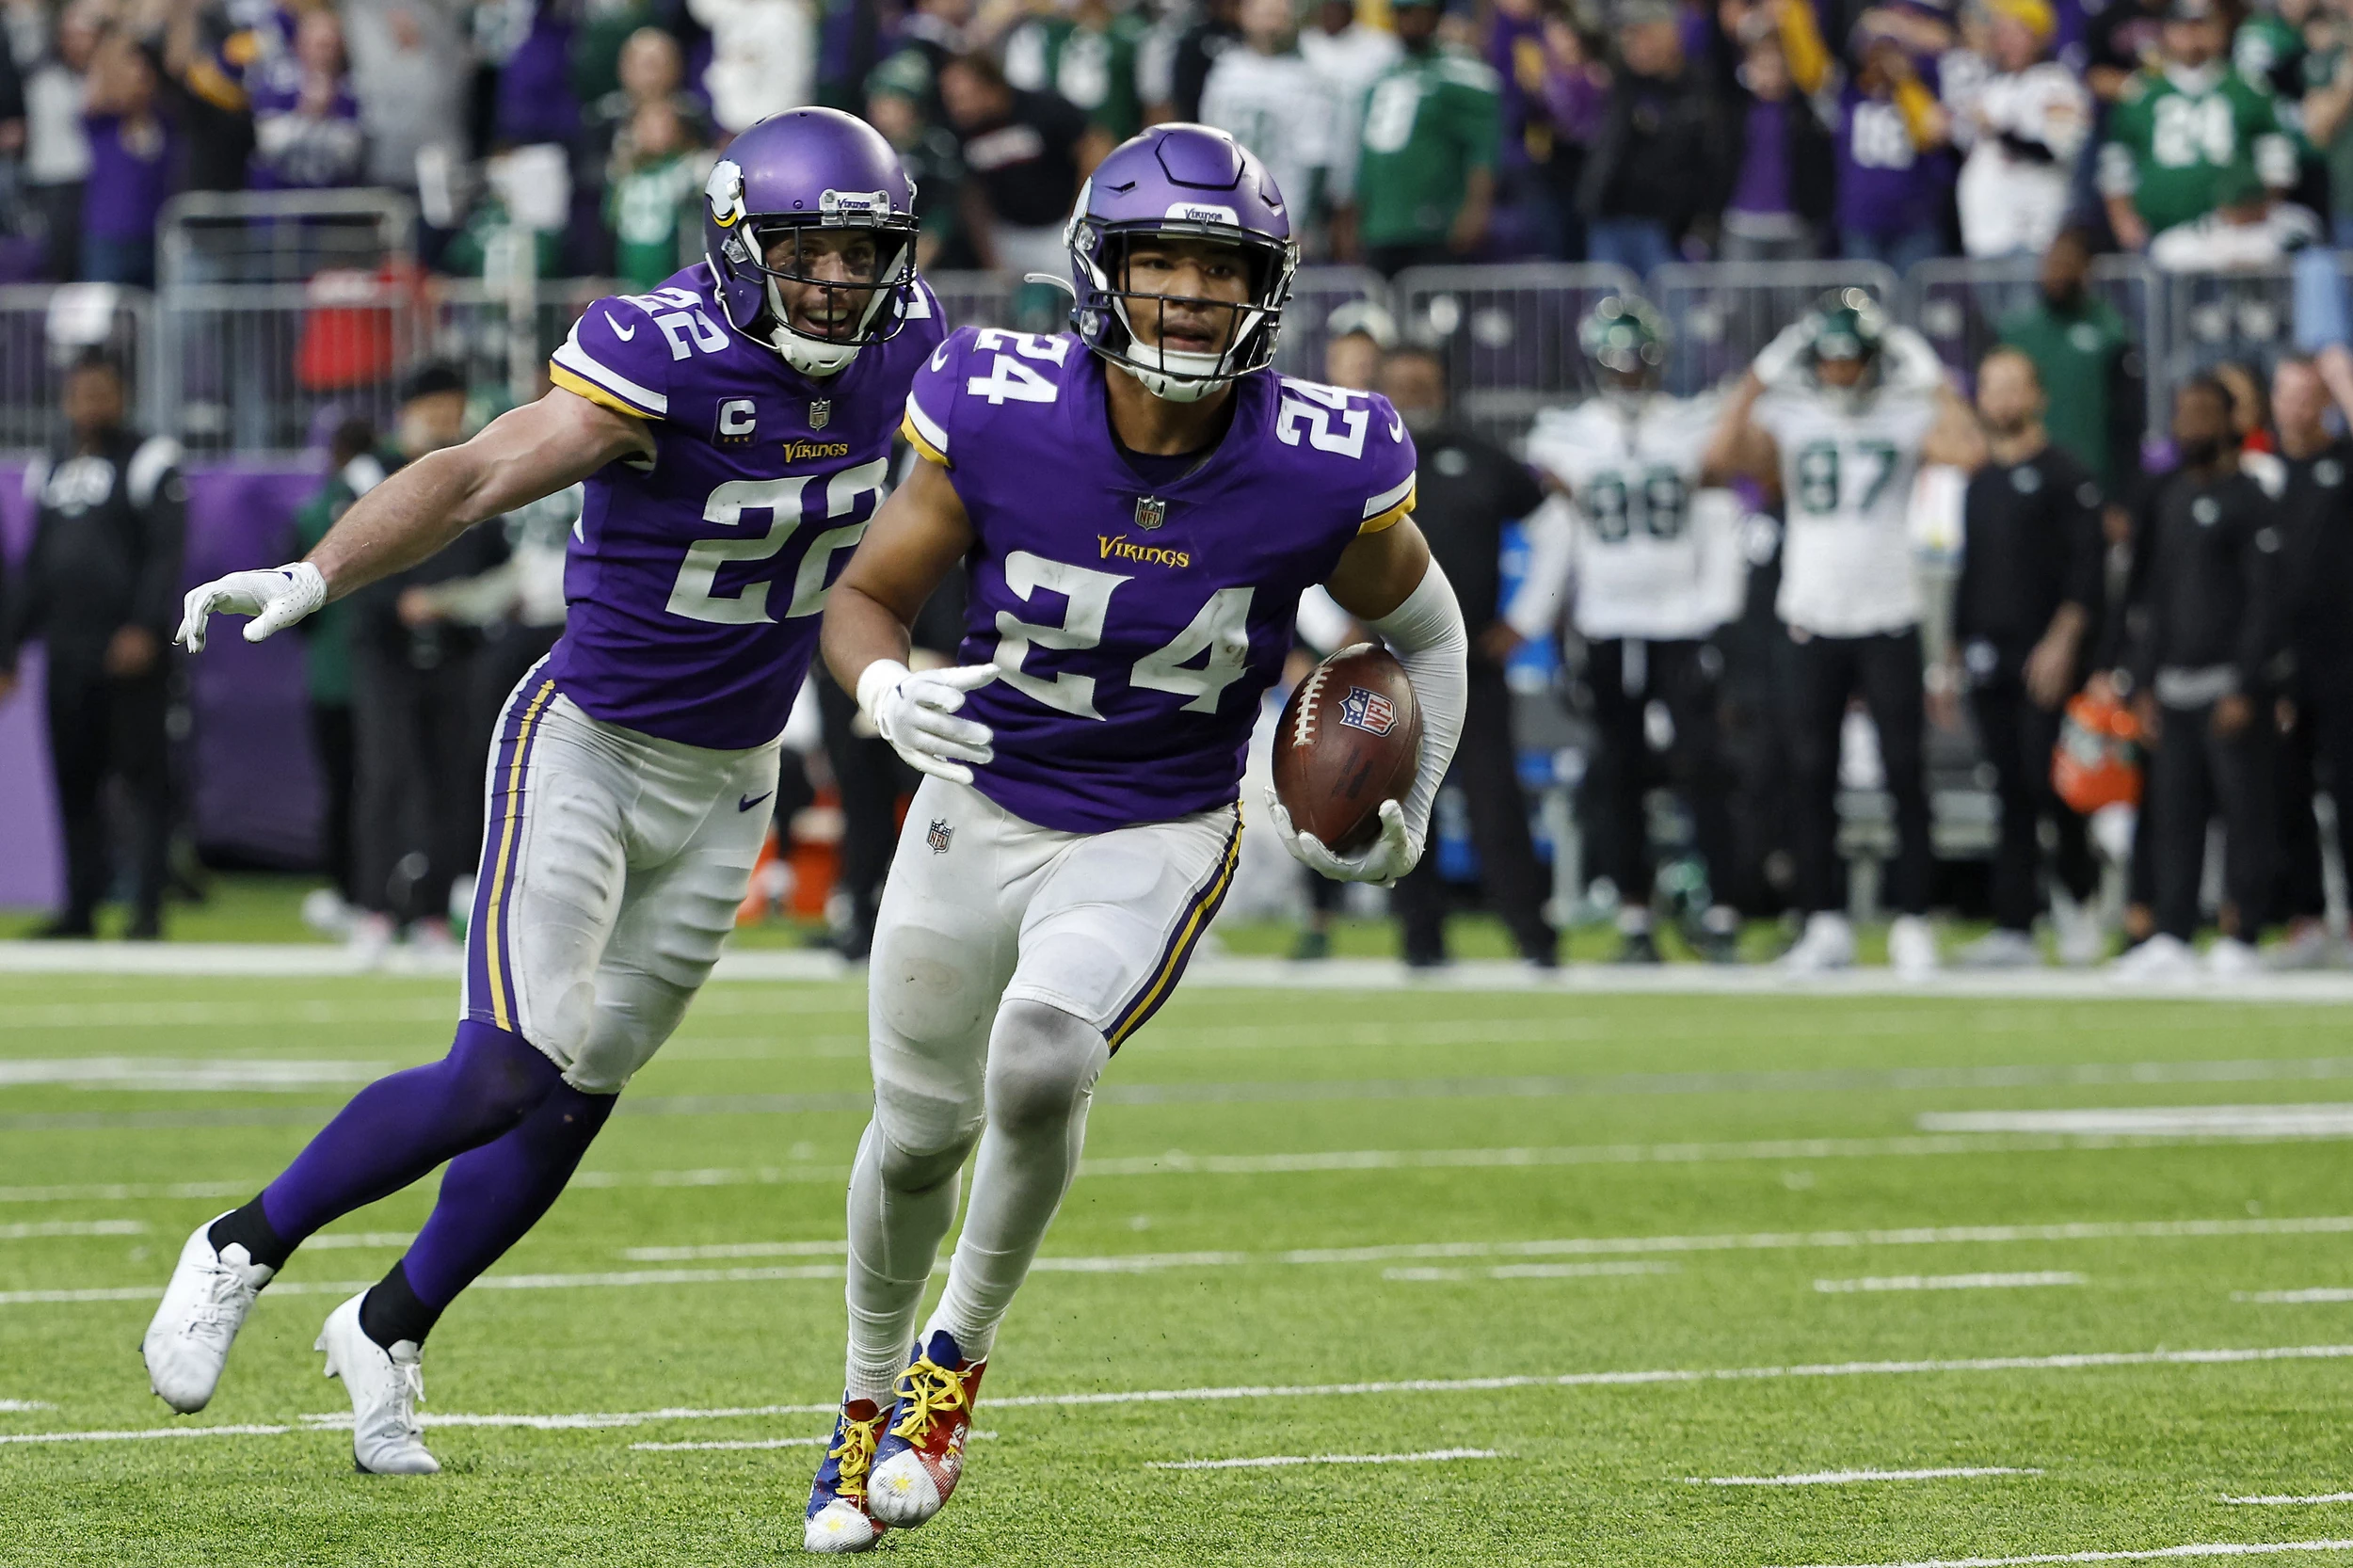 Minnesota Vikings and New York Jets Both Disappoint in Vikings Win